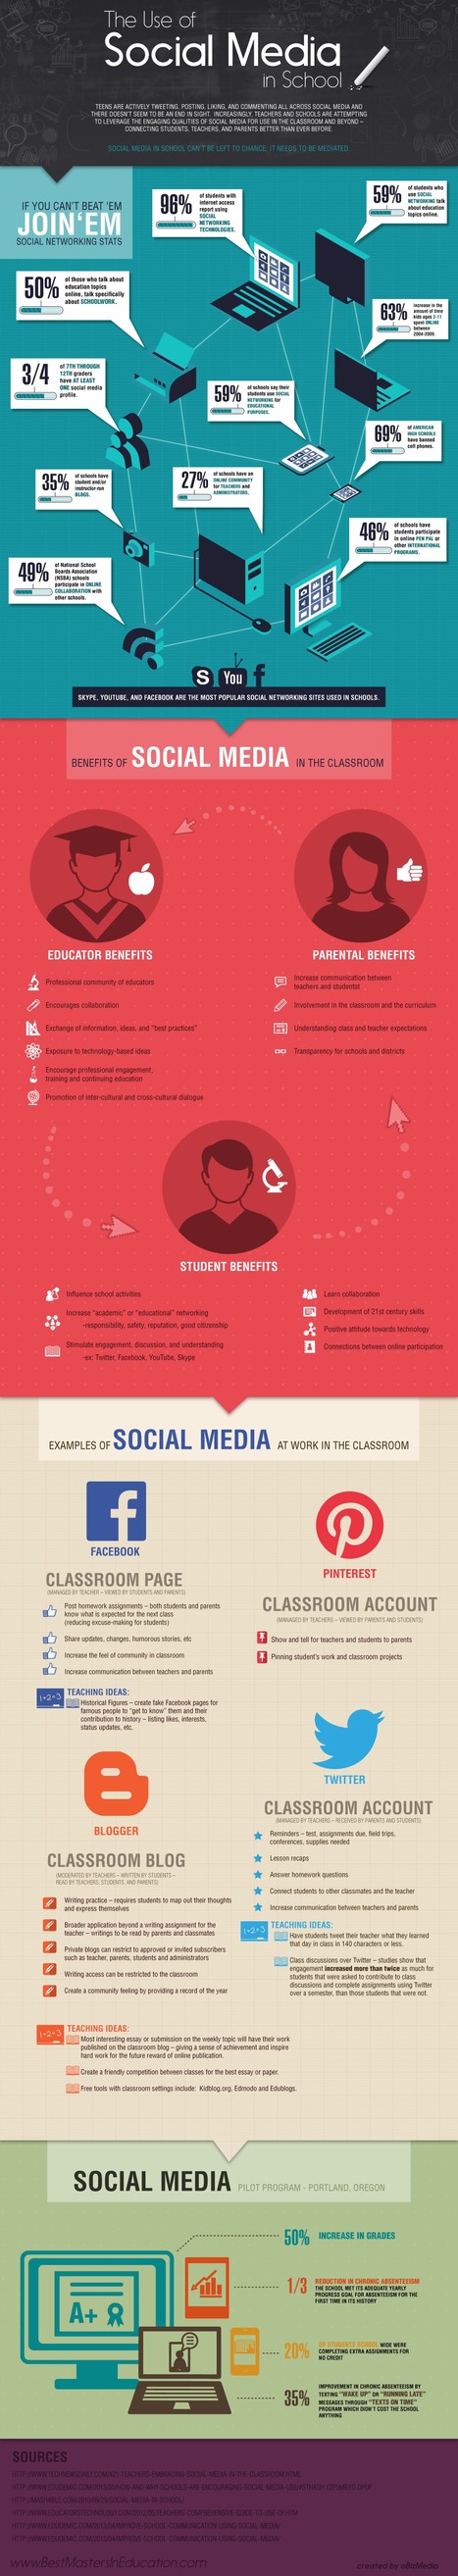 Social Media 101: Is There a Place For Social Media in Classrooms? [Infographic] | gpmt | Scoop.it